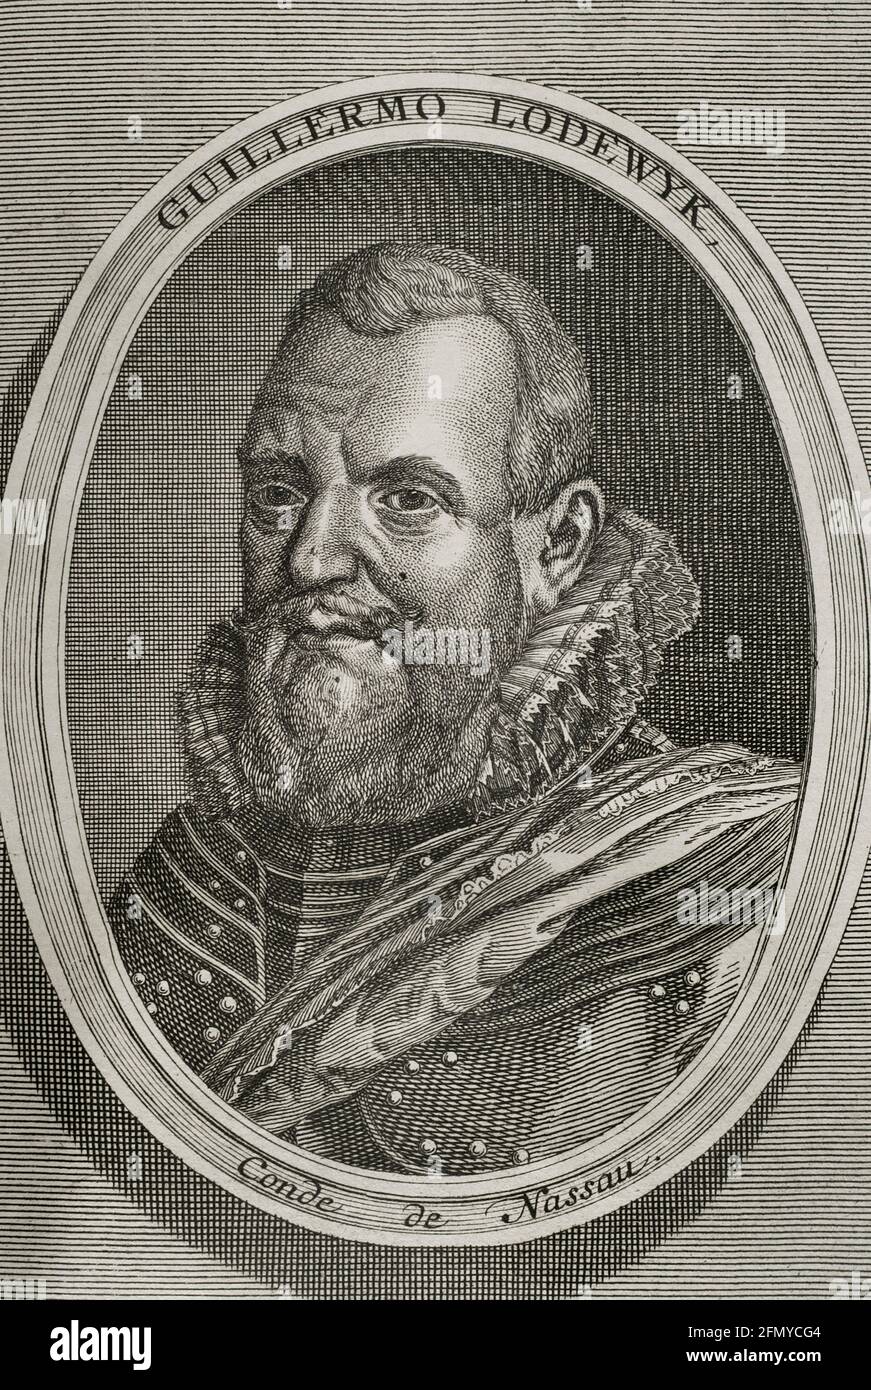 William Louis (1560-1620). Count of Nassau-Dillenburg. The eldest son of John VI of Nassau-Dillenburg. Stadtholder of Friesland, Drenthe and Groningen. He commanded the Dutch States Army Portrait. Engraving. Wars of Flanders. Edition published in Antwerp, 1748. Stock Photo